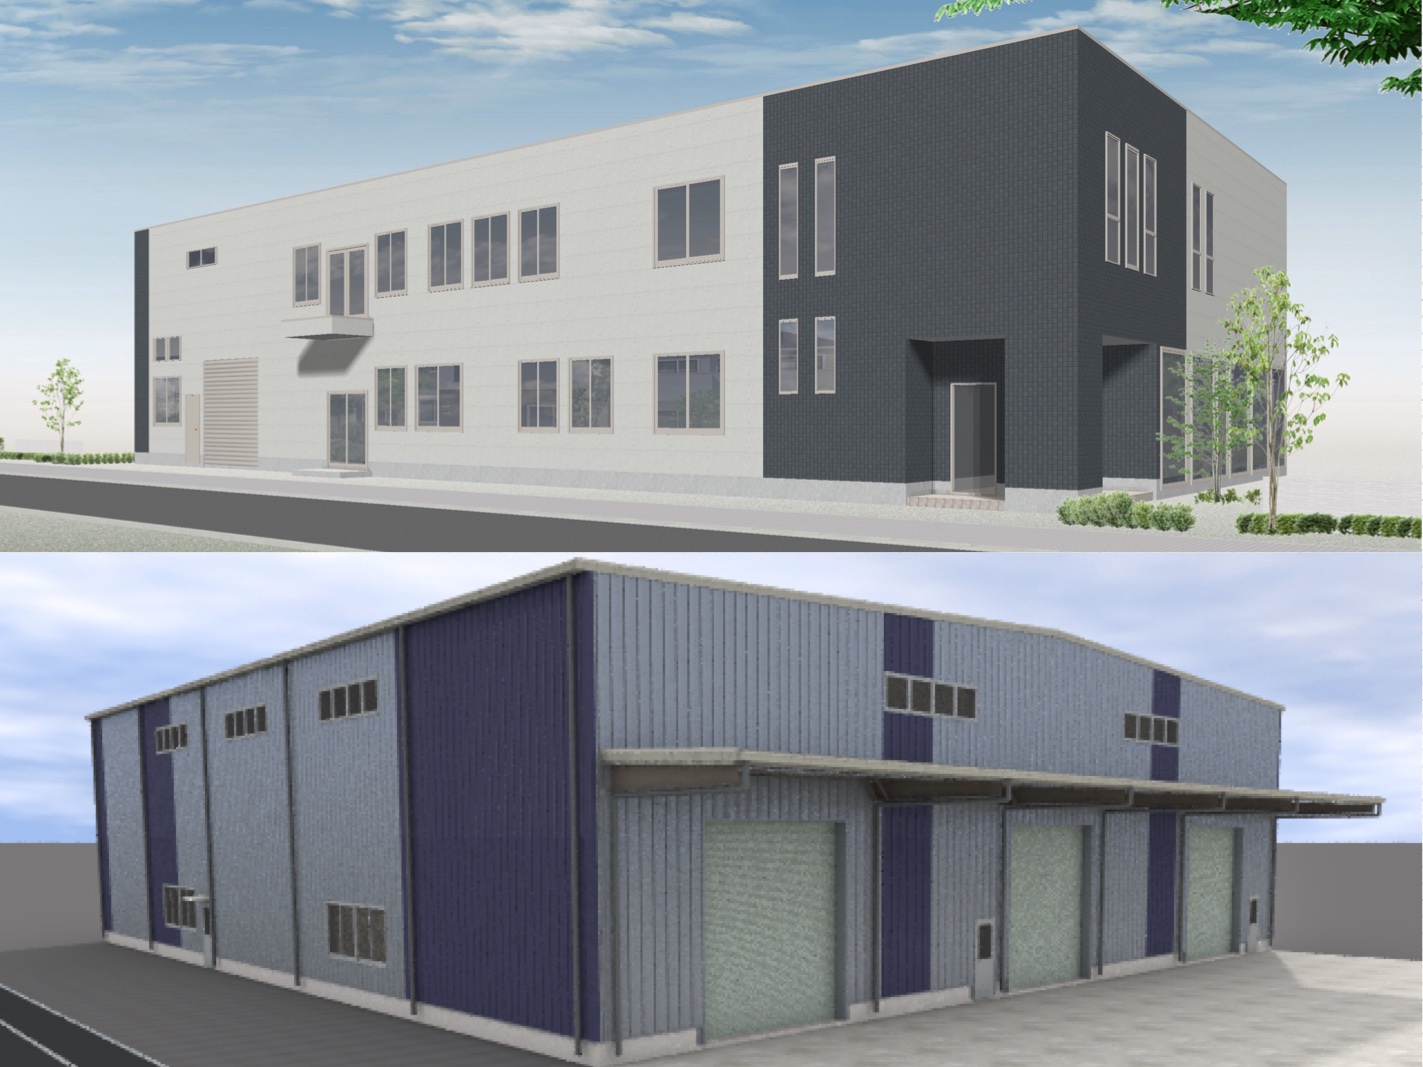 Yasui Seiki Japan is moving and expanding in Fall 2019!